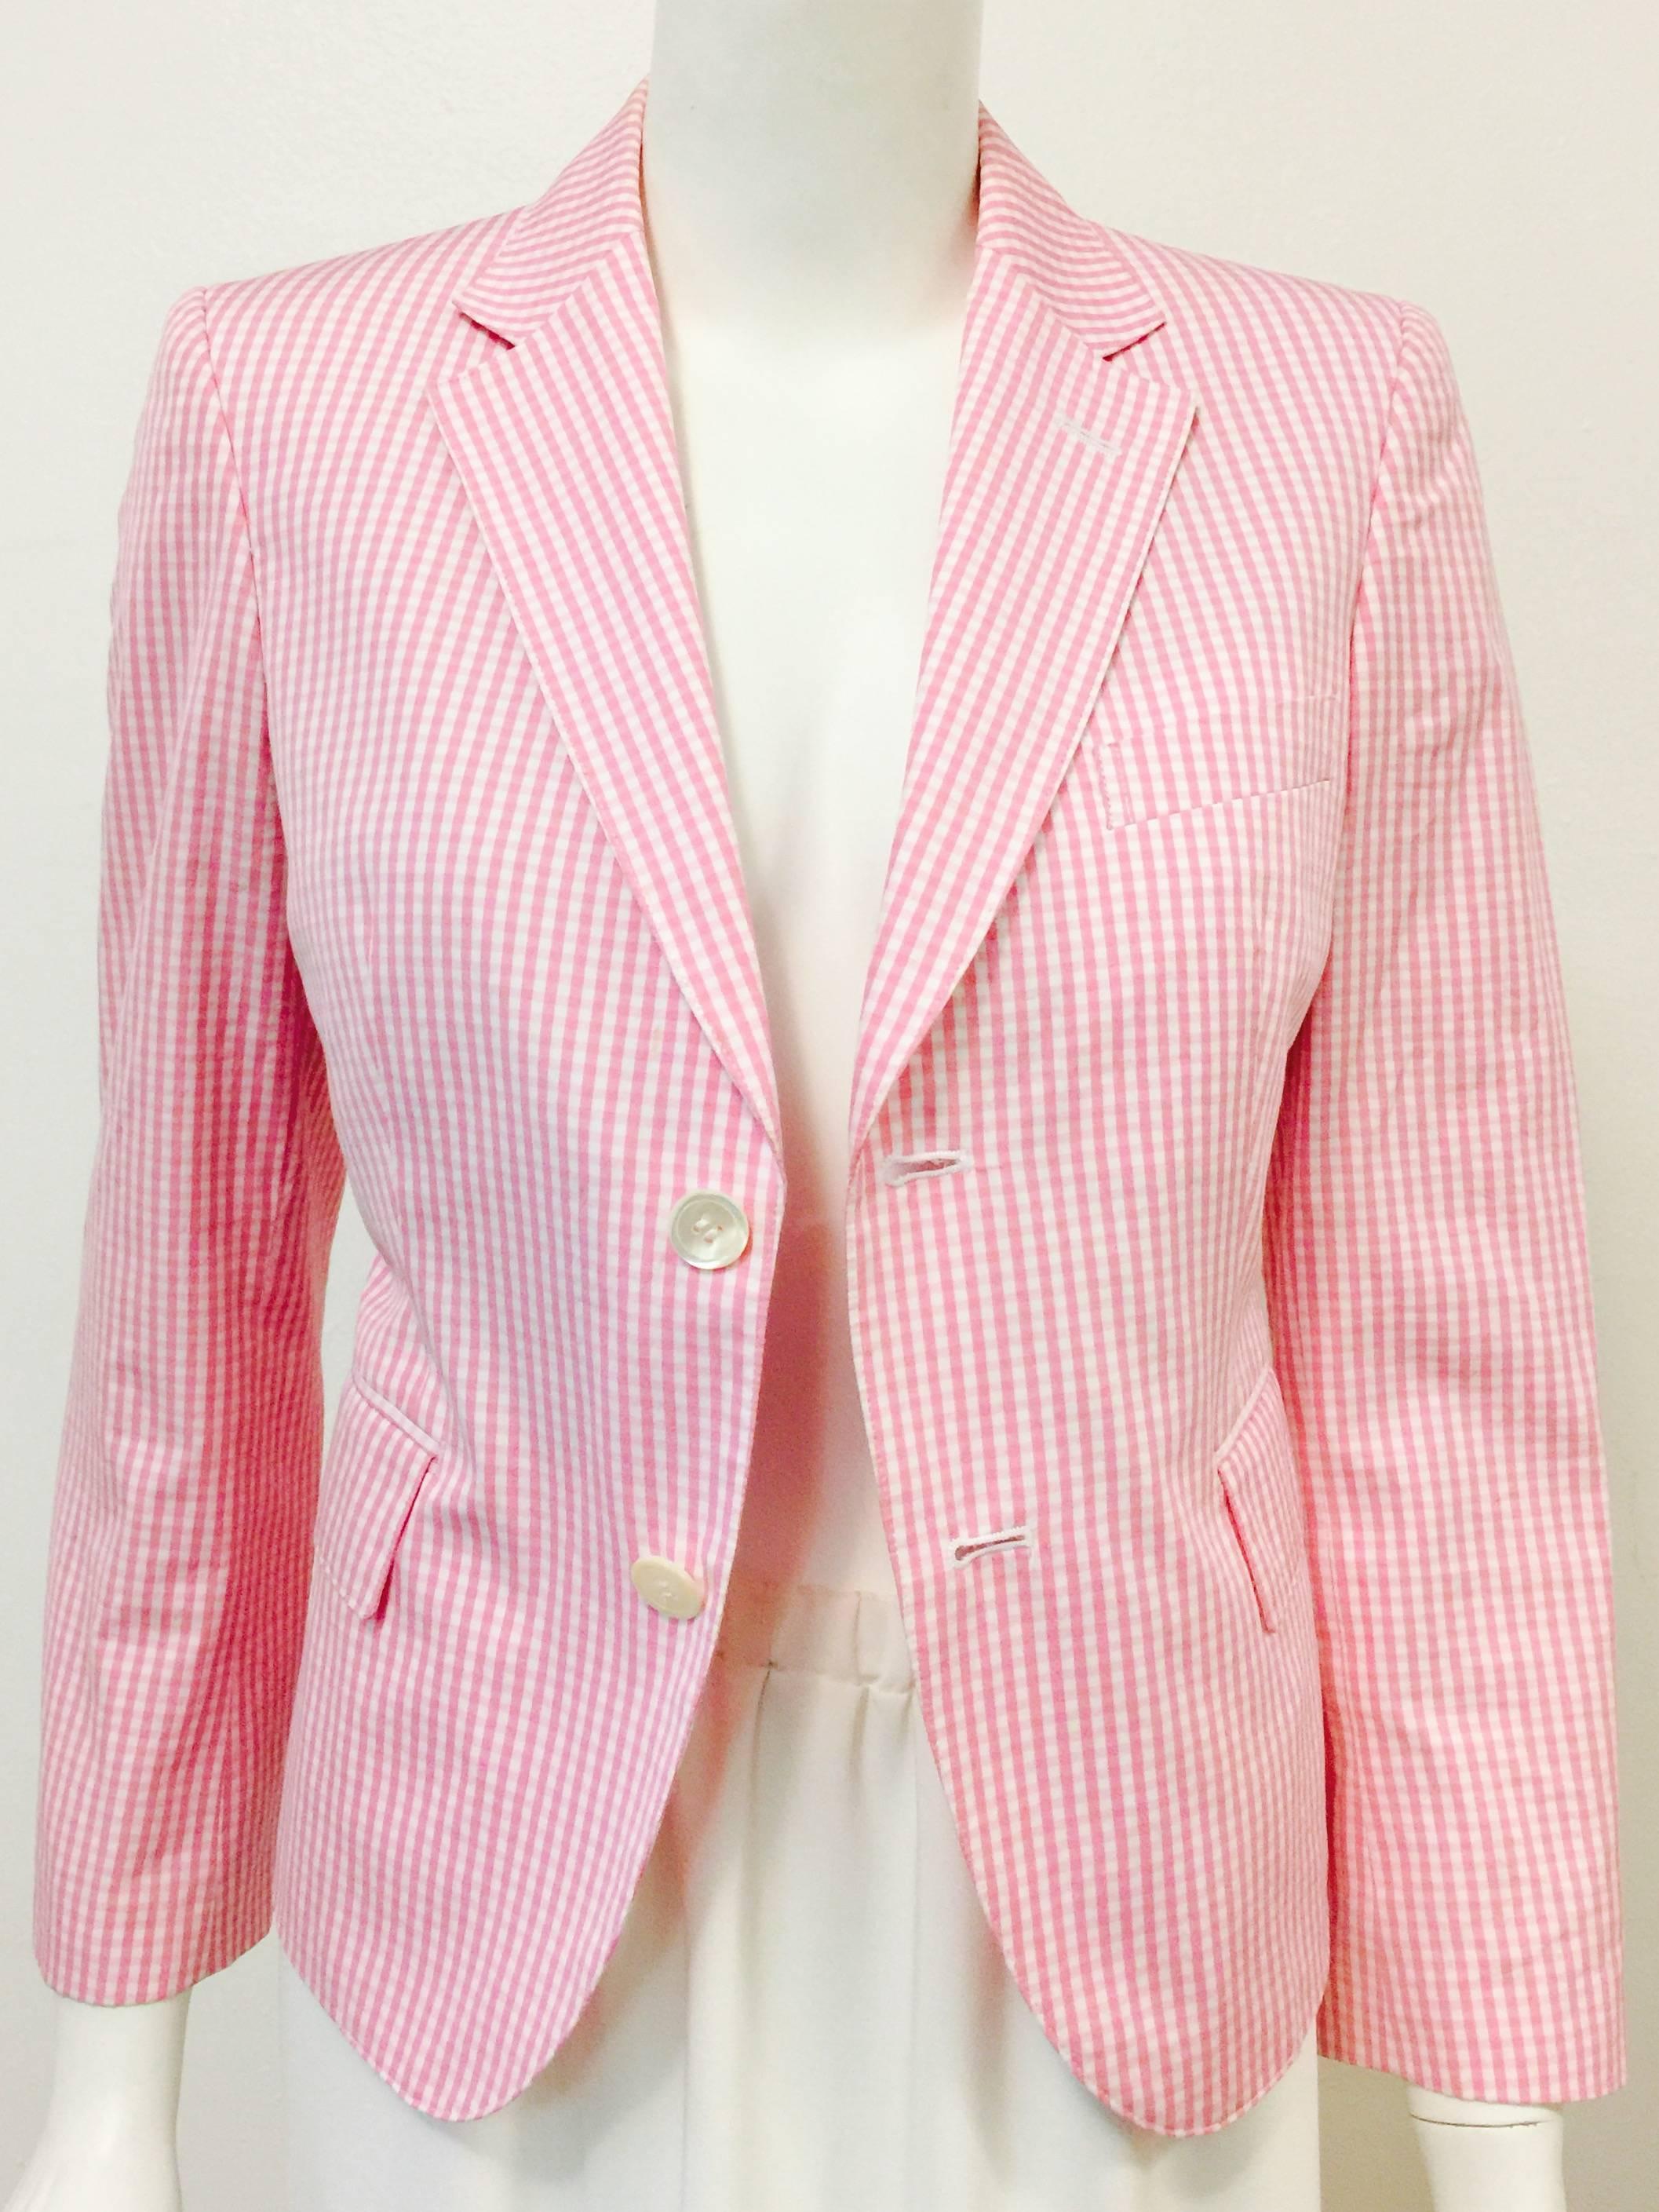 Comme des Garcons by Junya Watanabe Pink and White Gingham Blazer 2